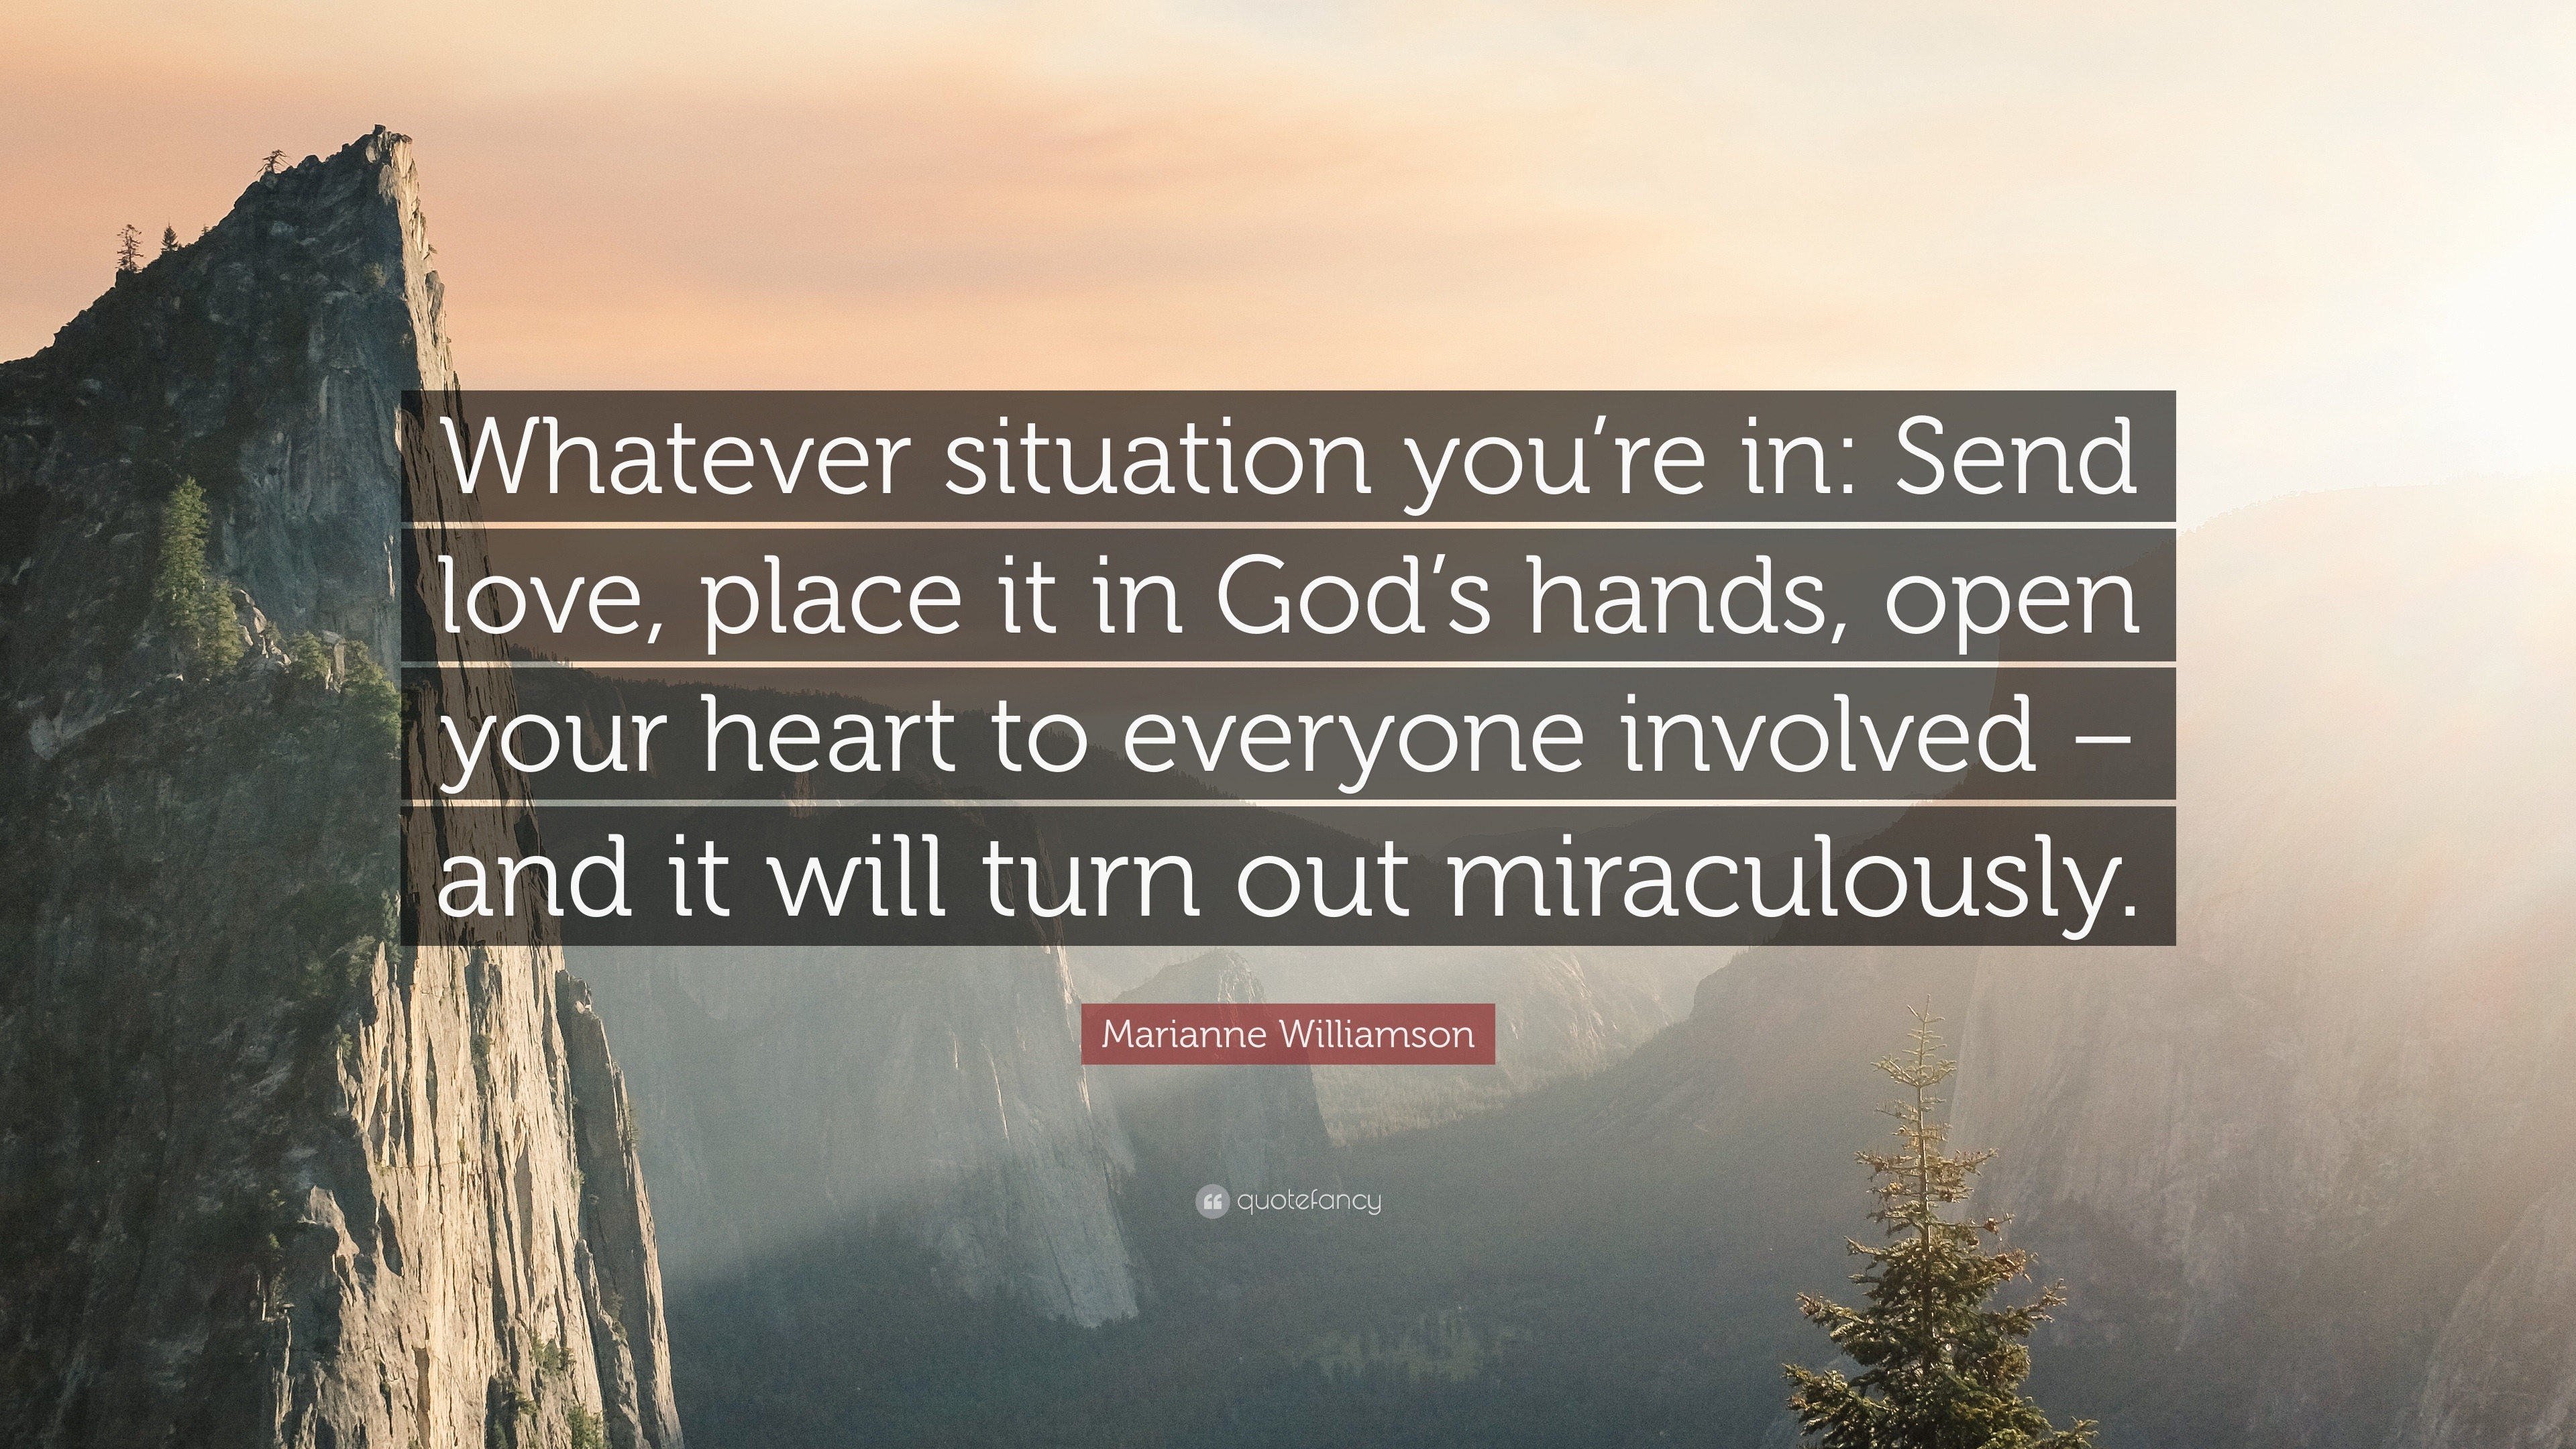 Marianne Williamson Quote “Whatever situation you re in Send love place